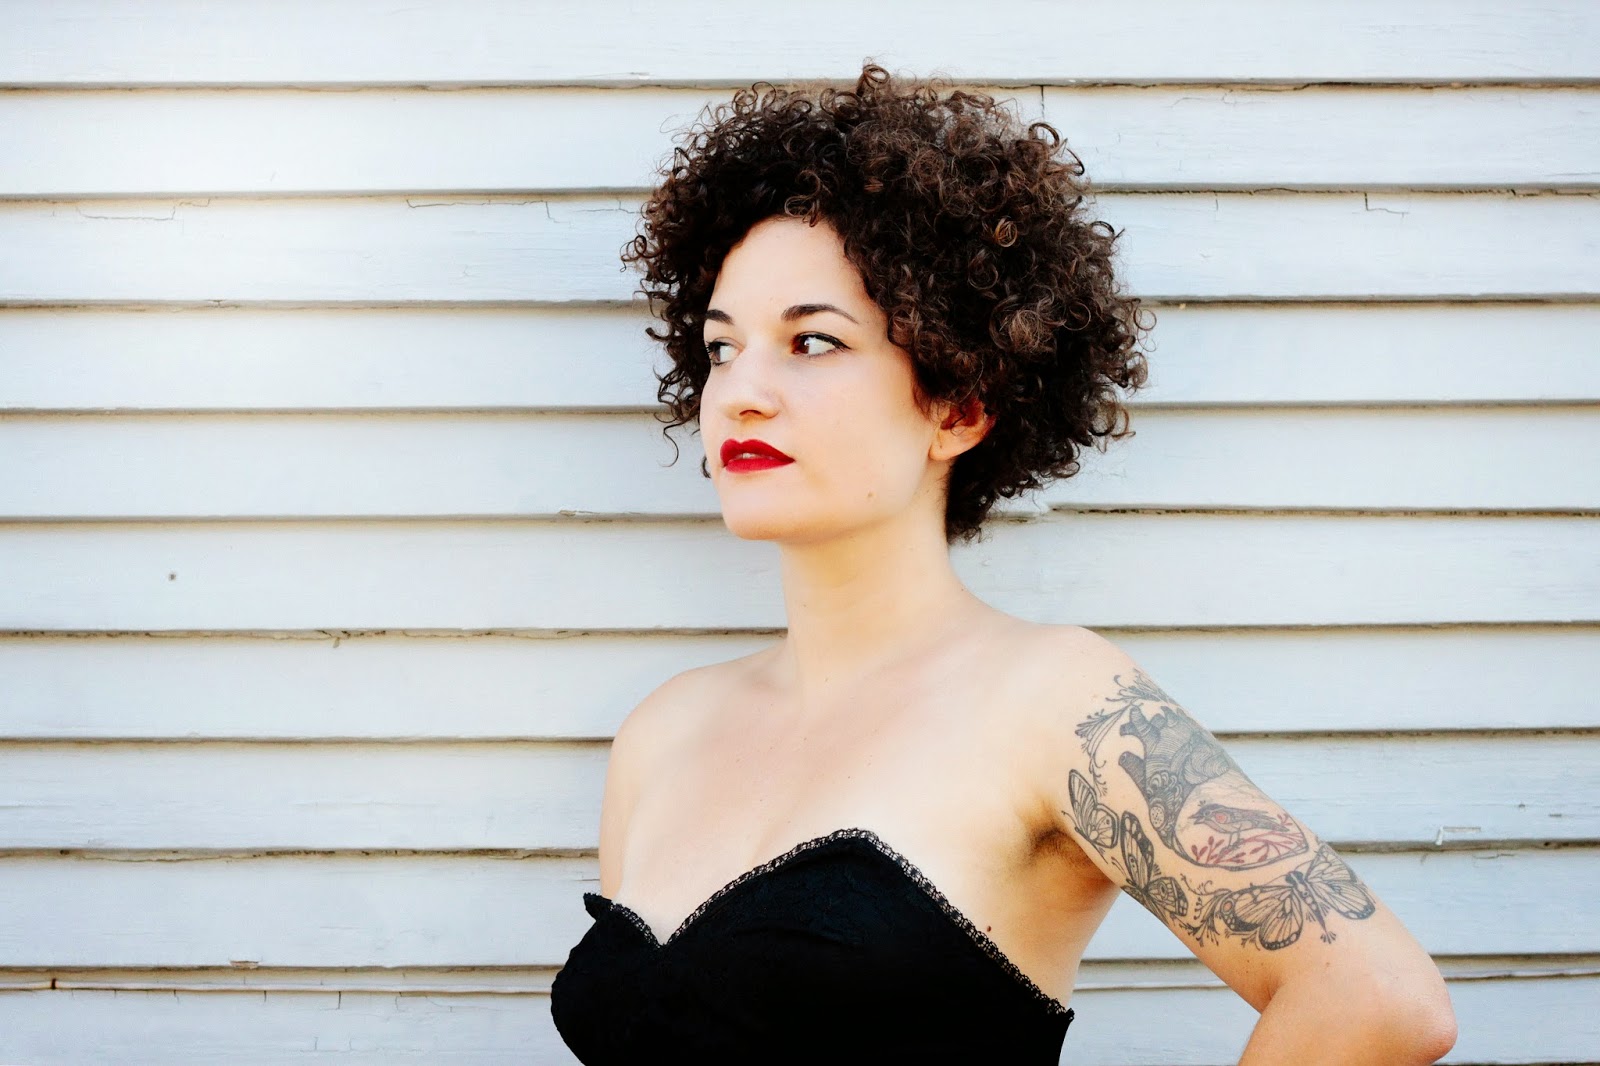 Closeup of head and torso of woman with black curly hair, red lipstick, tattoos on left arm, strapless black dress